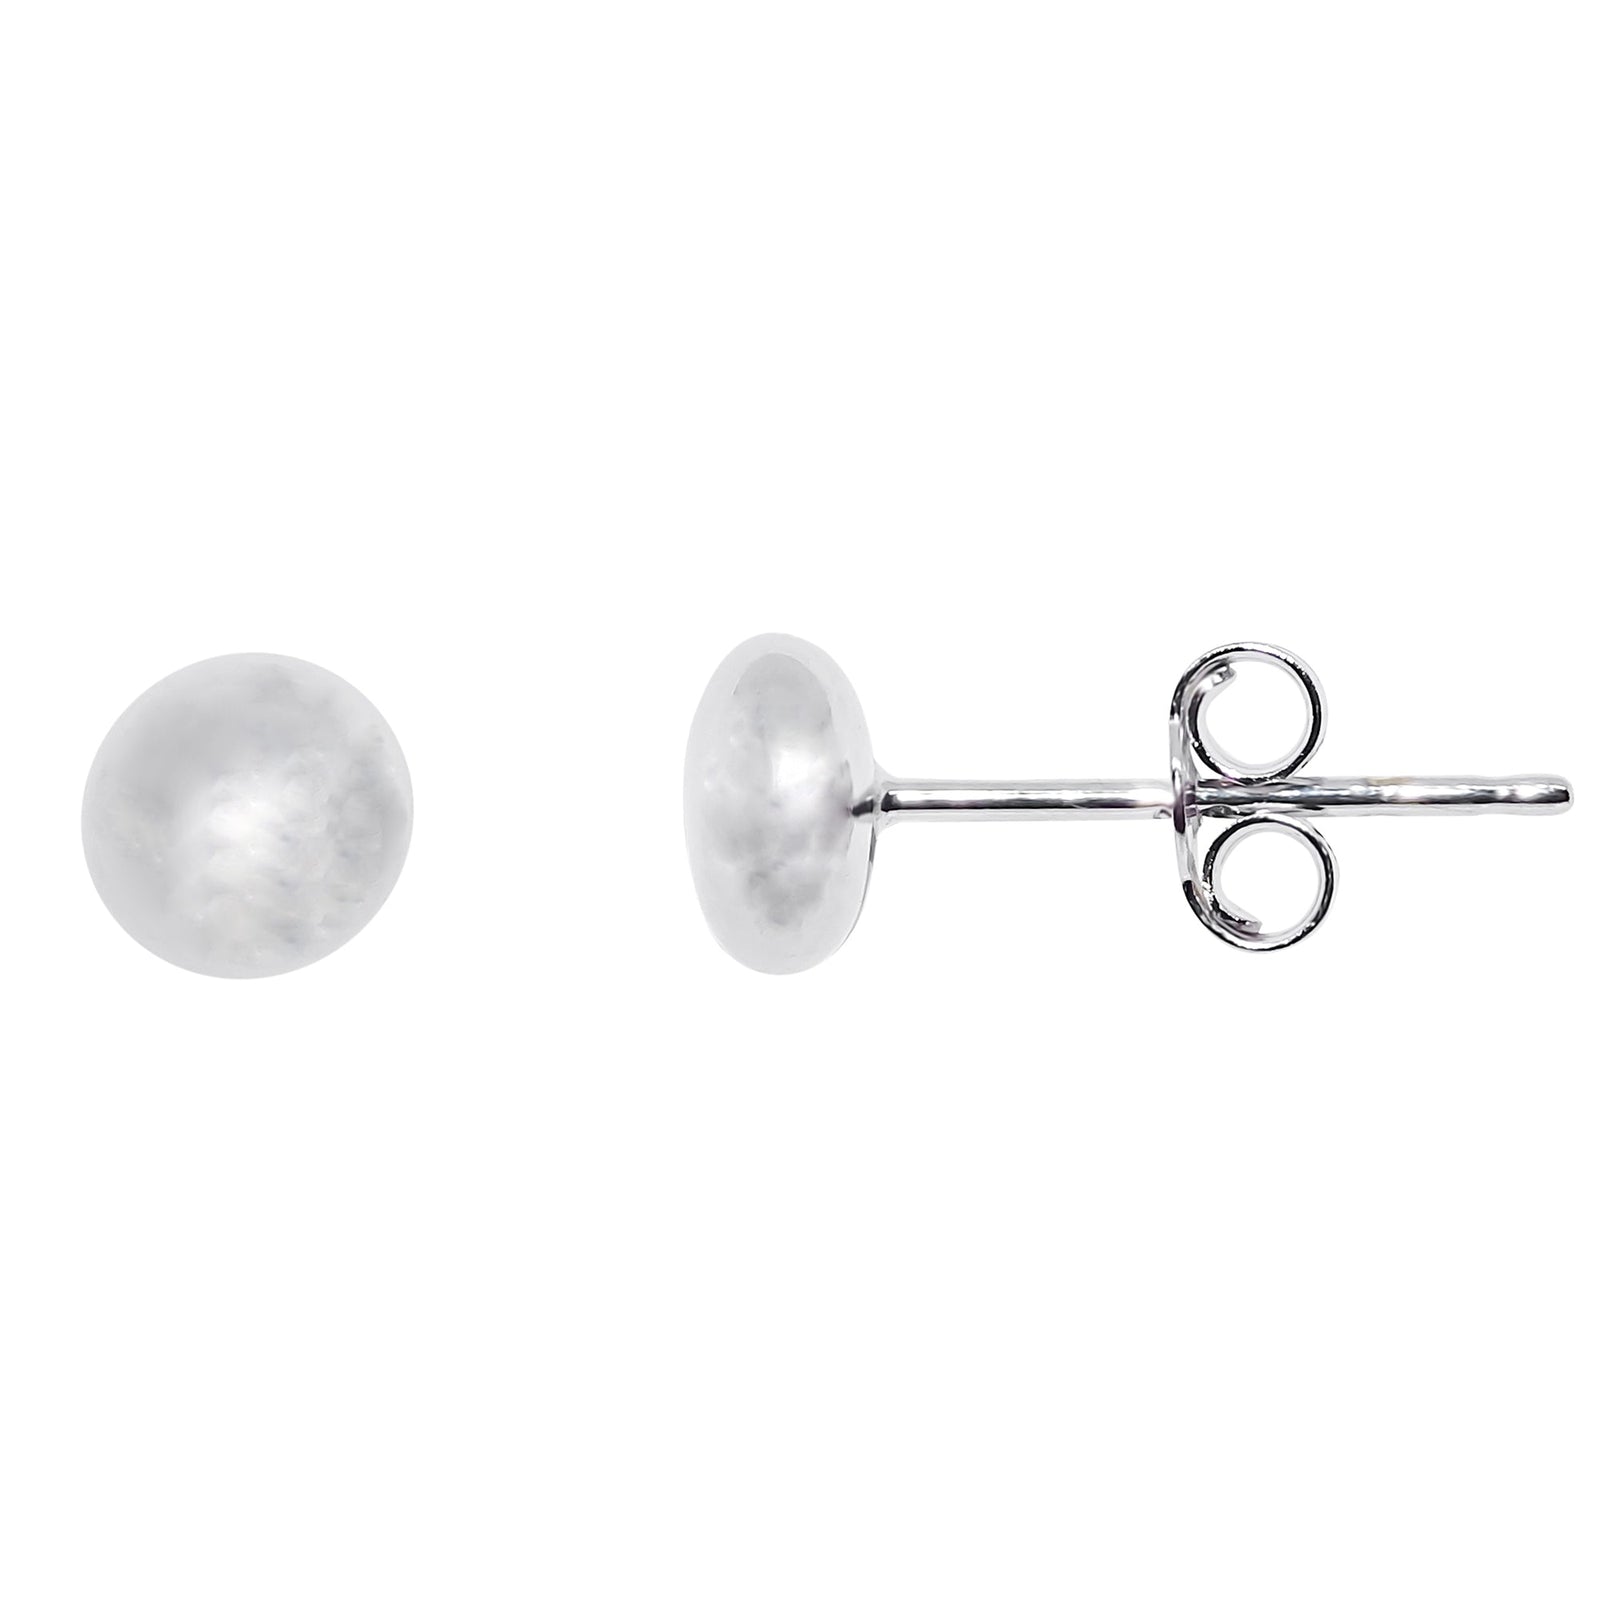 9ct white gold 5mm bouton stud earrings